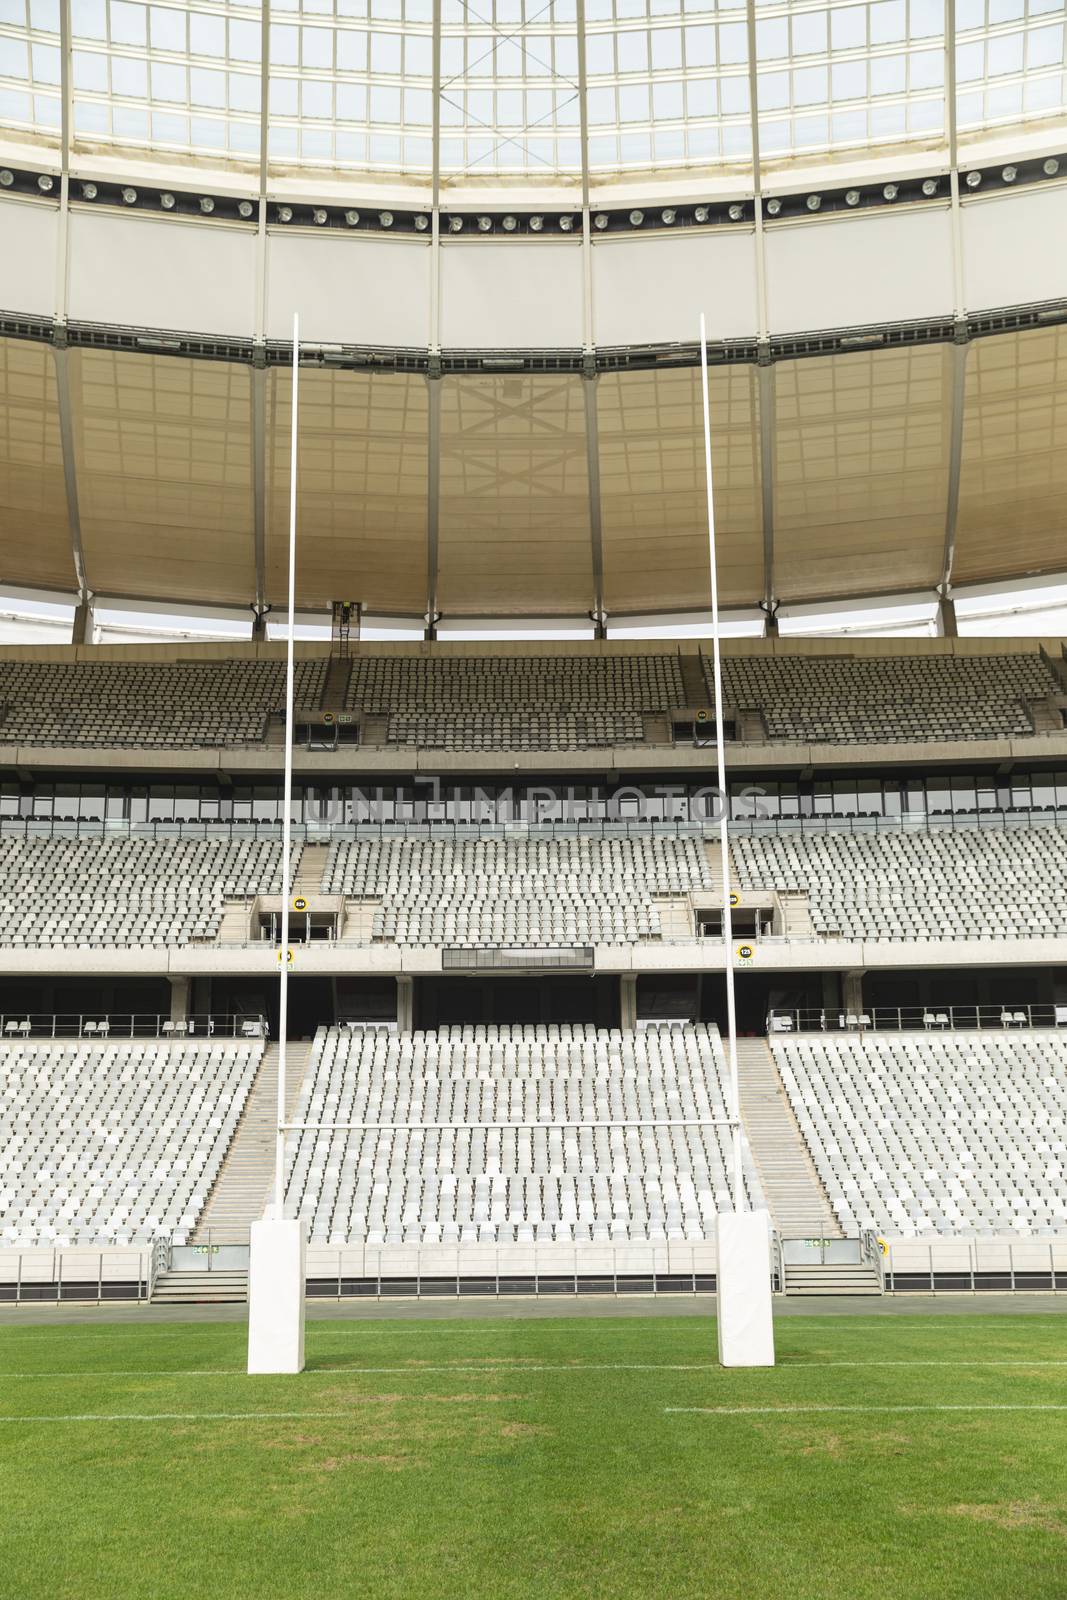 Rugby goal post in a empty stadium